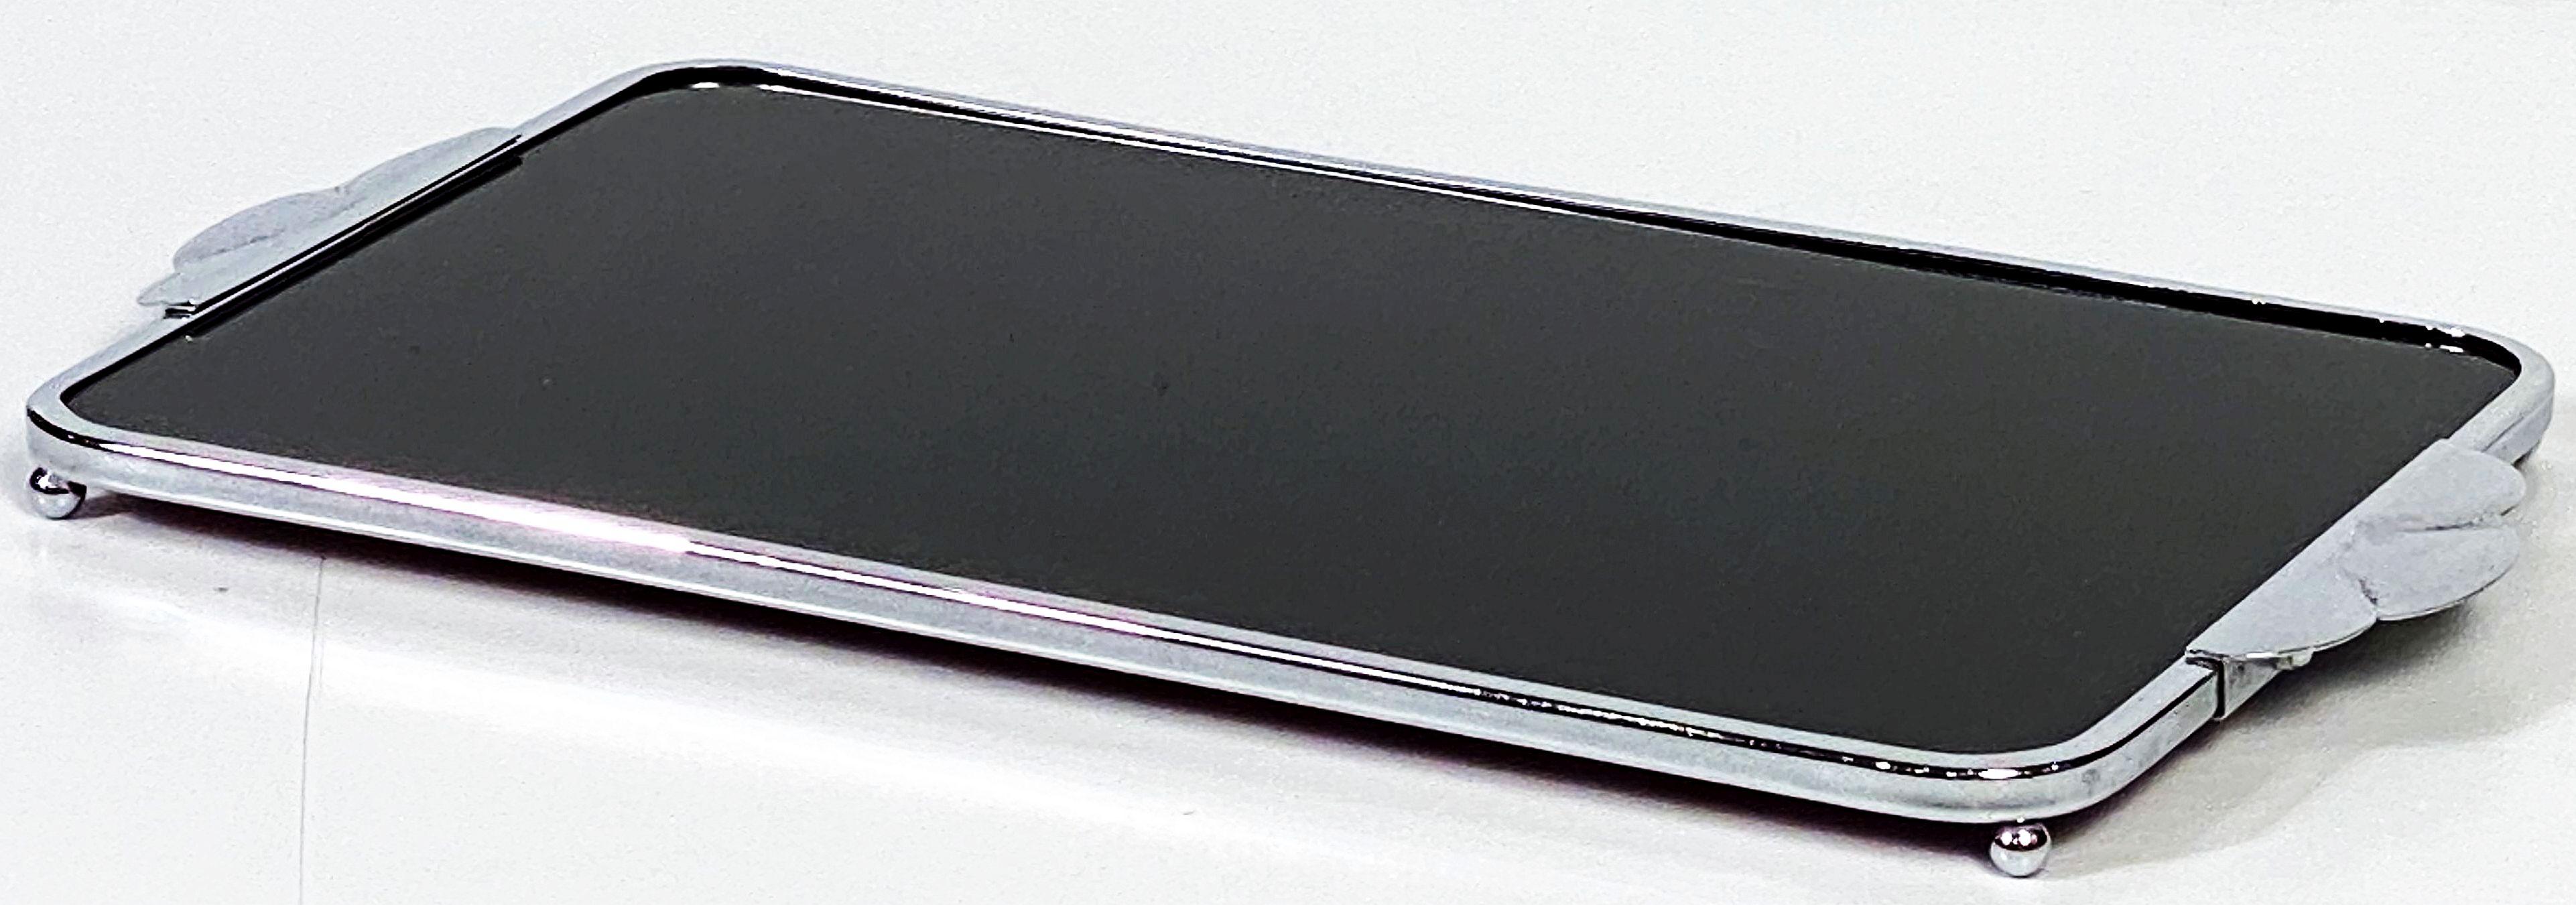 A period Art Deco rectangular serving tray for drinks and cocktails from England, featuring two opposing handles and frame of chromed metal surrounding an inset black glass tray surface, resting on ball feet. Underside of cordovan pressed